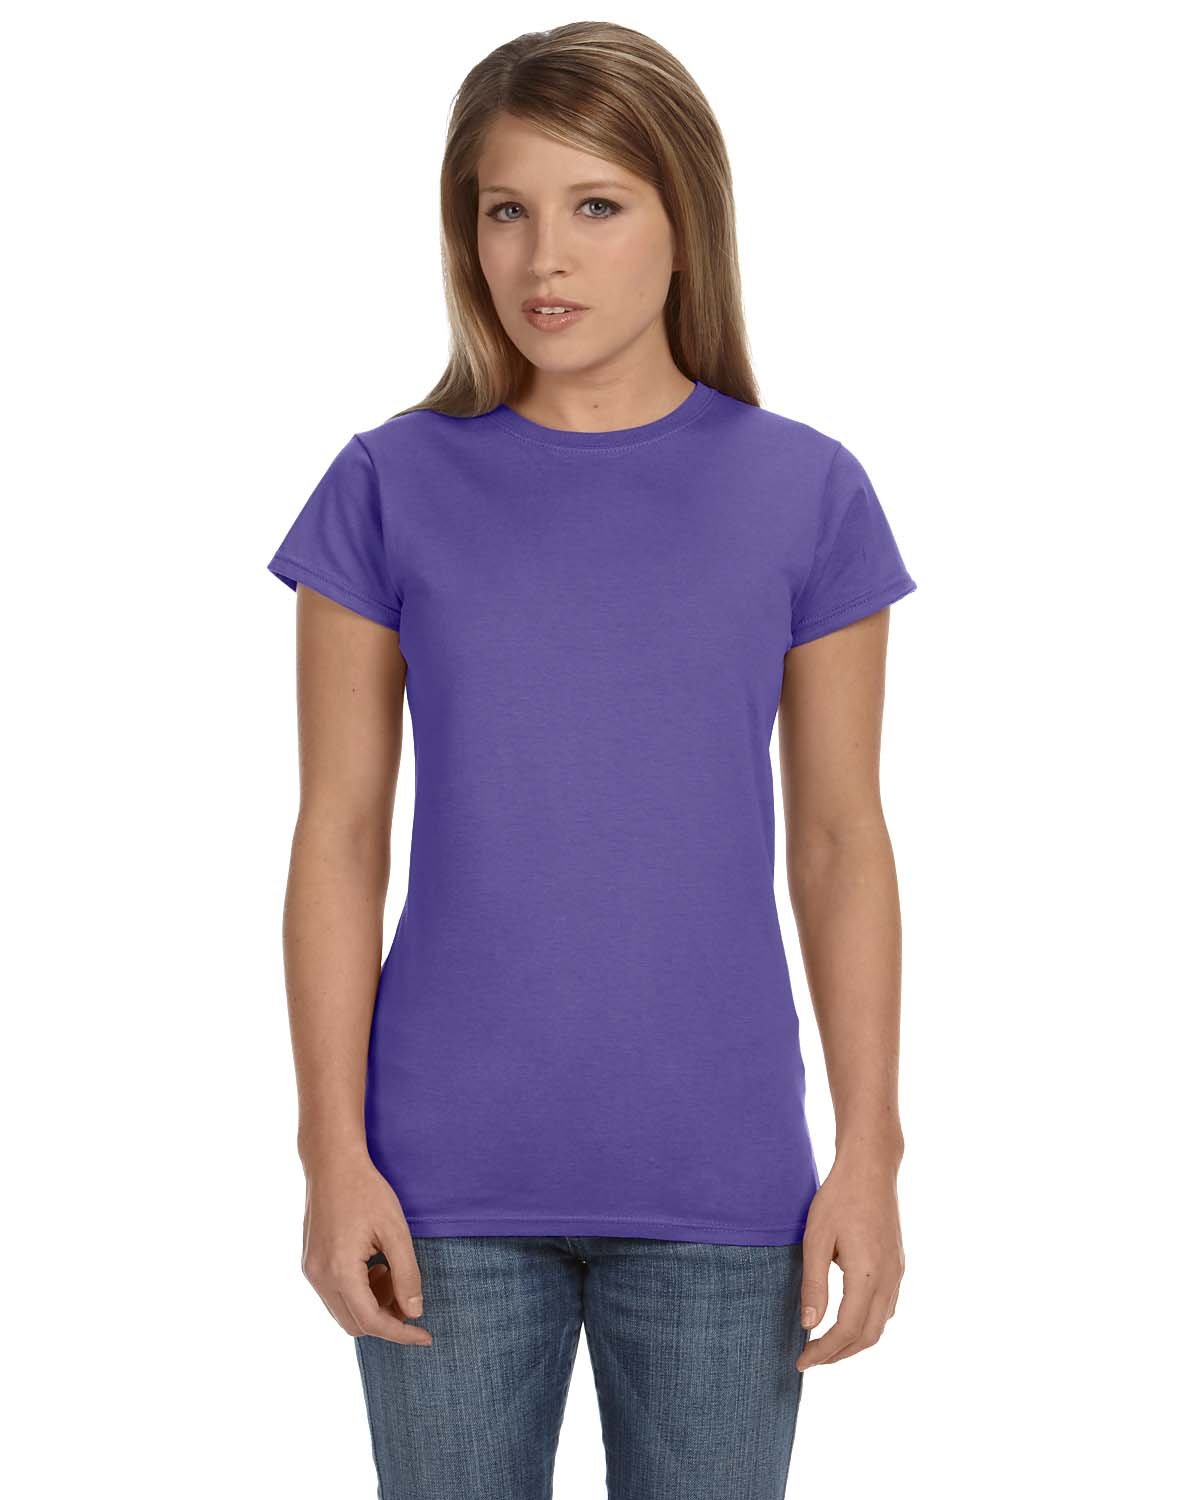 Gildan Ladies' Softstyle® Fitted T-Shirt HEATHER PURPLE 